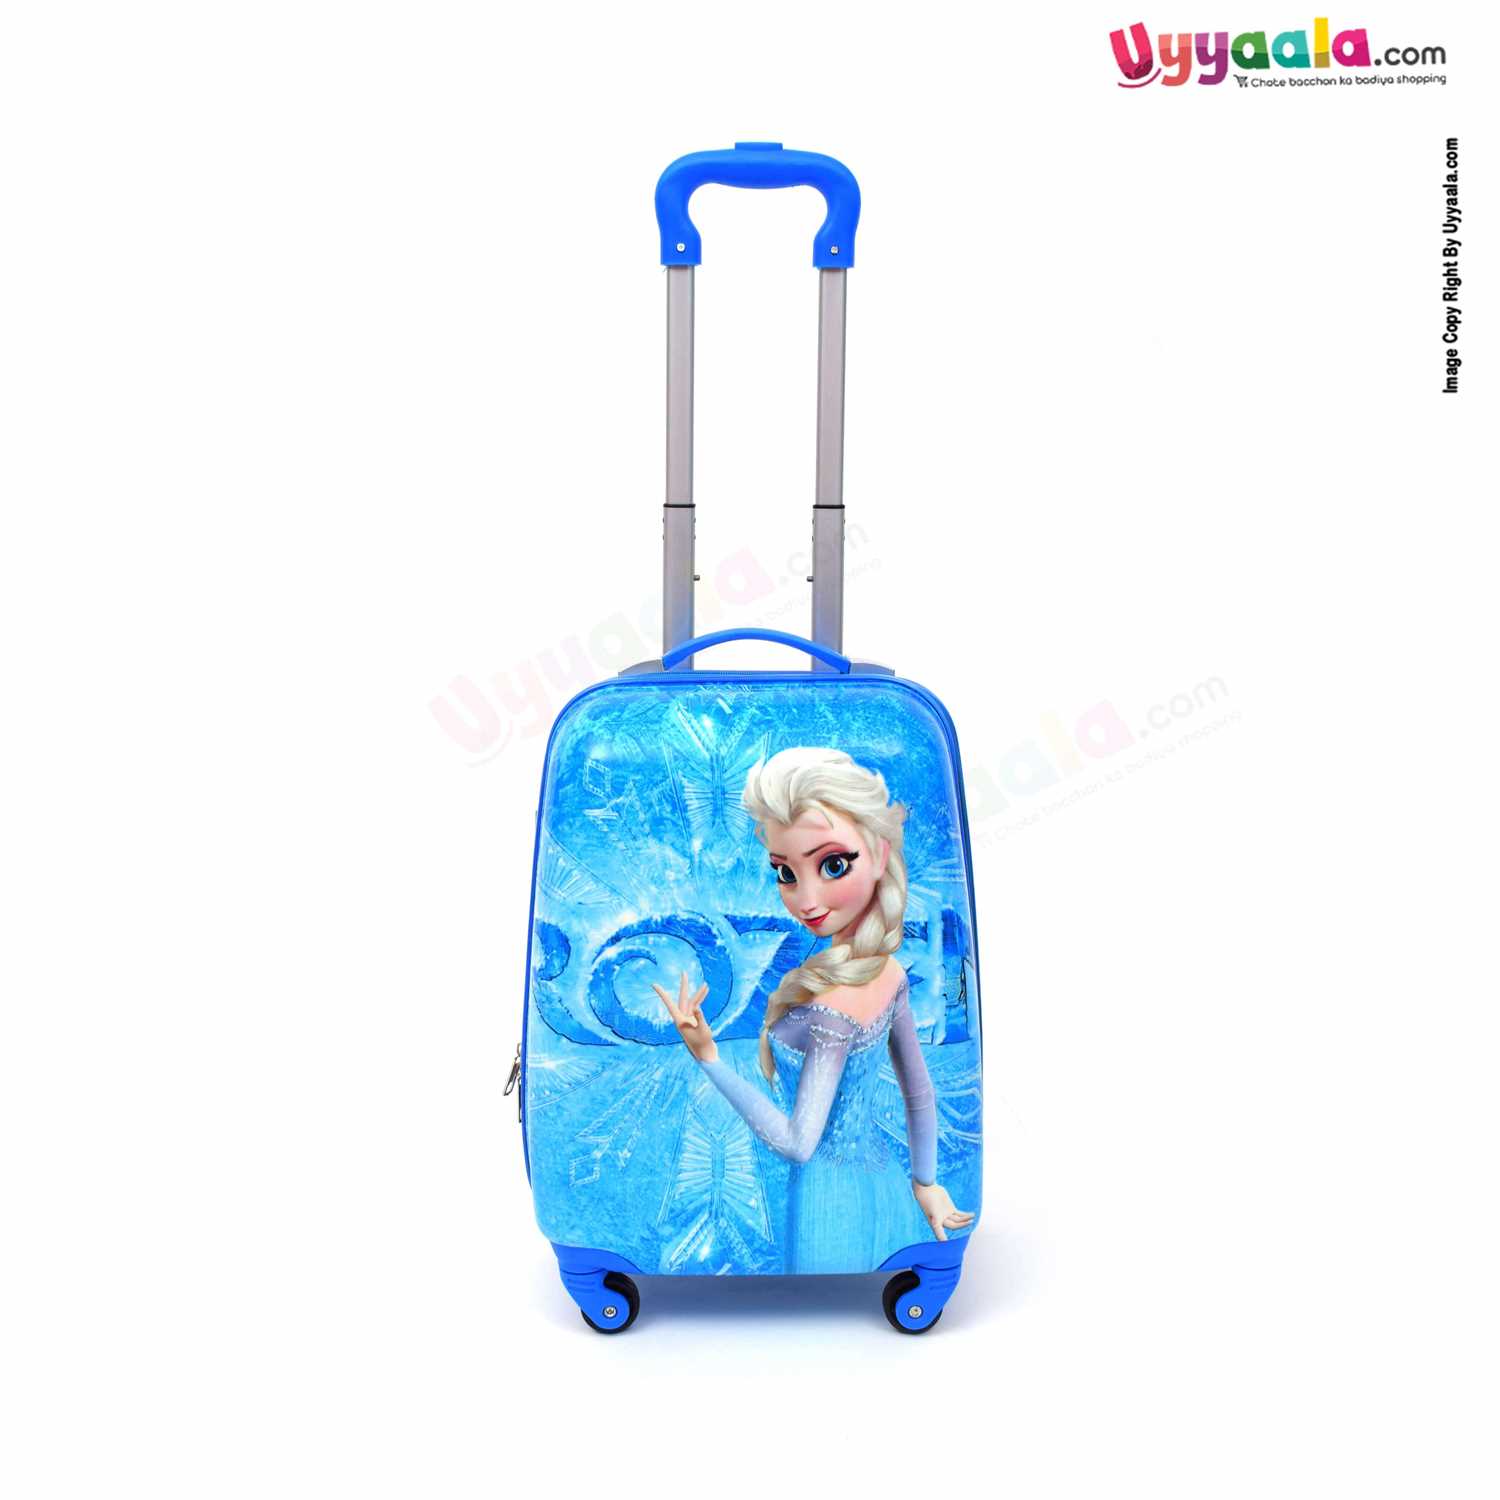 Kids character trolley bag set Contains big size trolley bag, lunch bag and  stationery purse Suitable for 4-10 years Price: #14,500 | Instagram